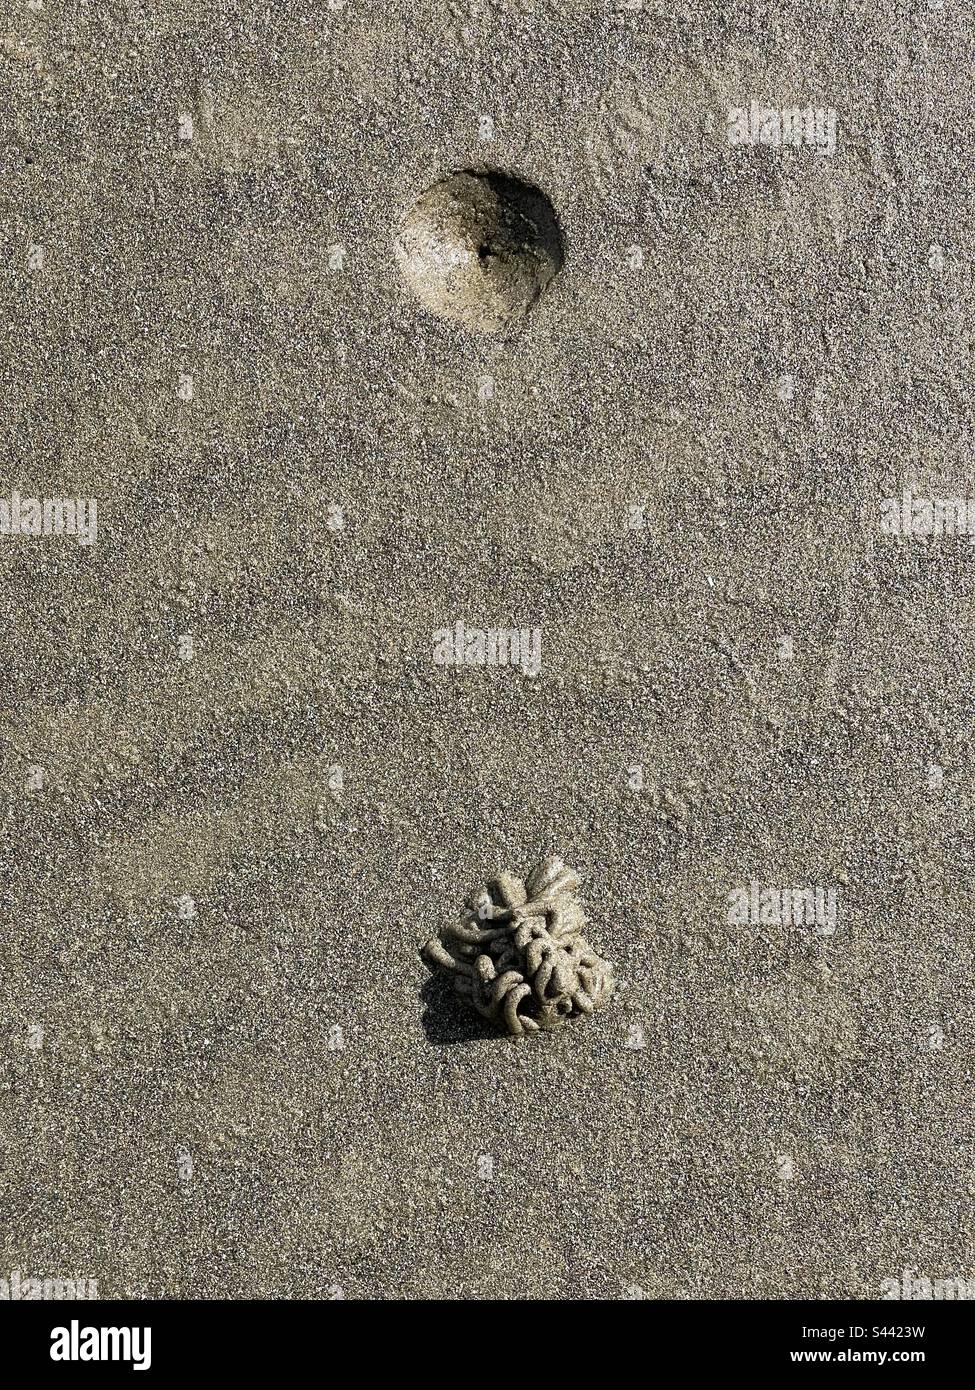 Worm cast and blow hole of a lugworm (Arenicola marina) on a sandy Welsh beach. Stock Photo